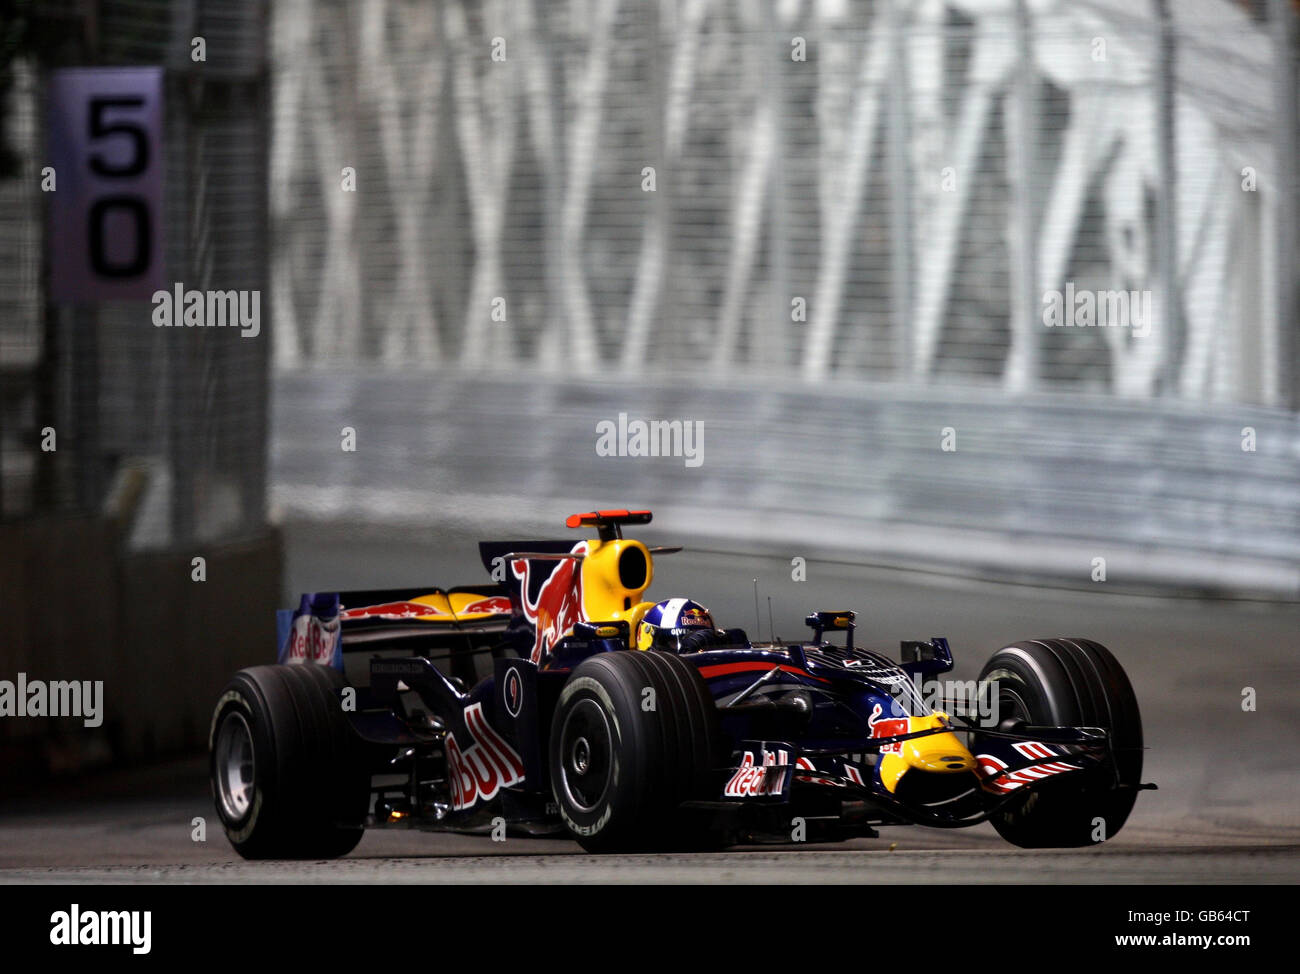 Motor Racing - Formula One Singtel Singapore Grand Prix - Practice Session - Marina Bay Circuit Park. Red Bull's David Coulthard drives over the Anderson Bridge during a practice session at the Marina Bay Circuit Park in Singapore. Stock Photo